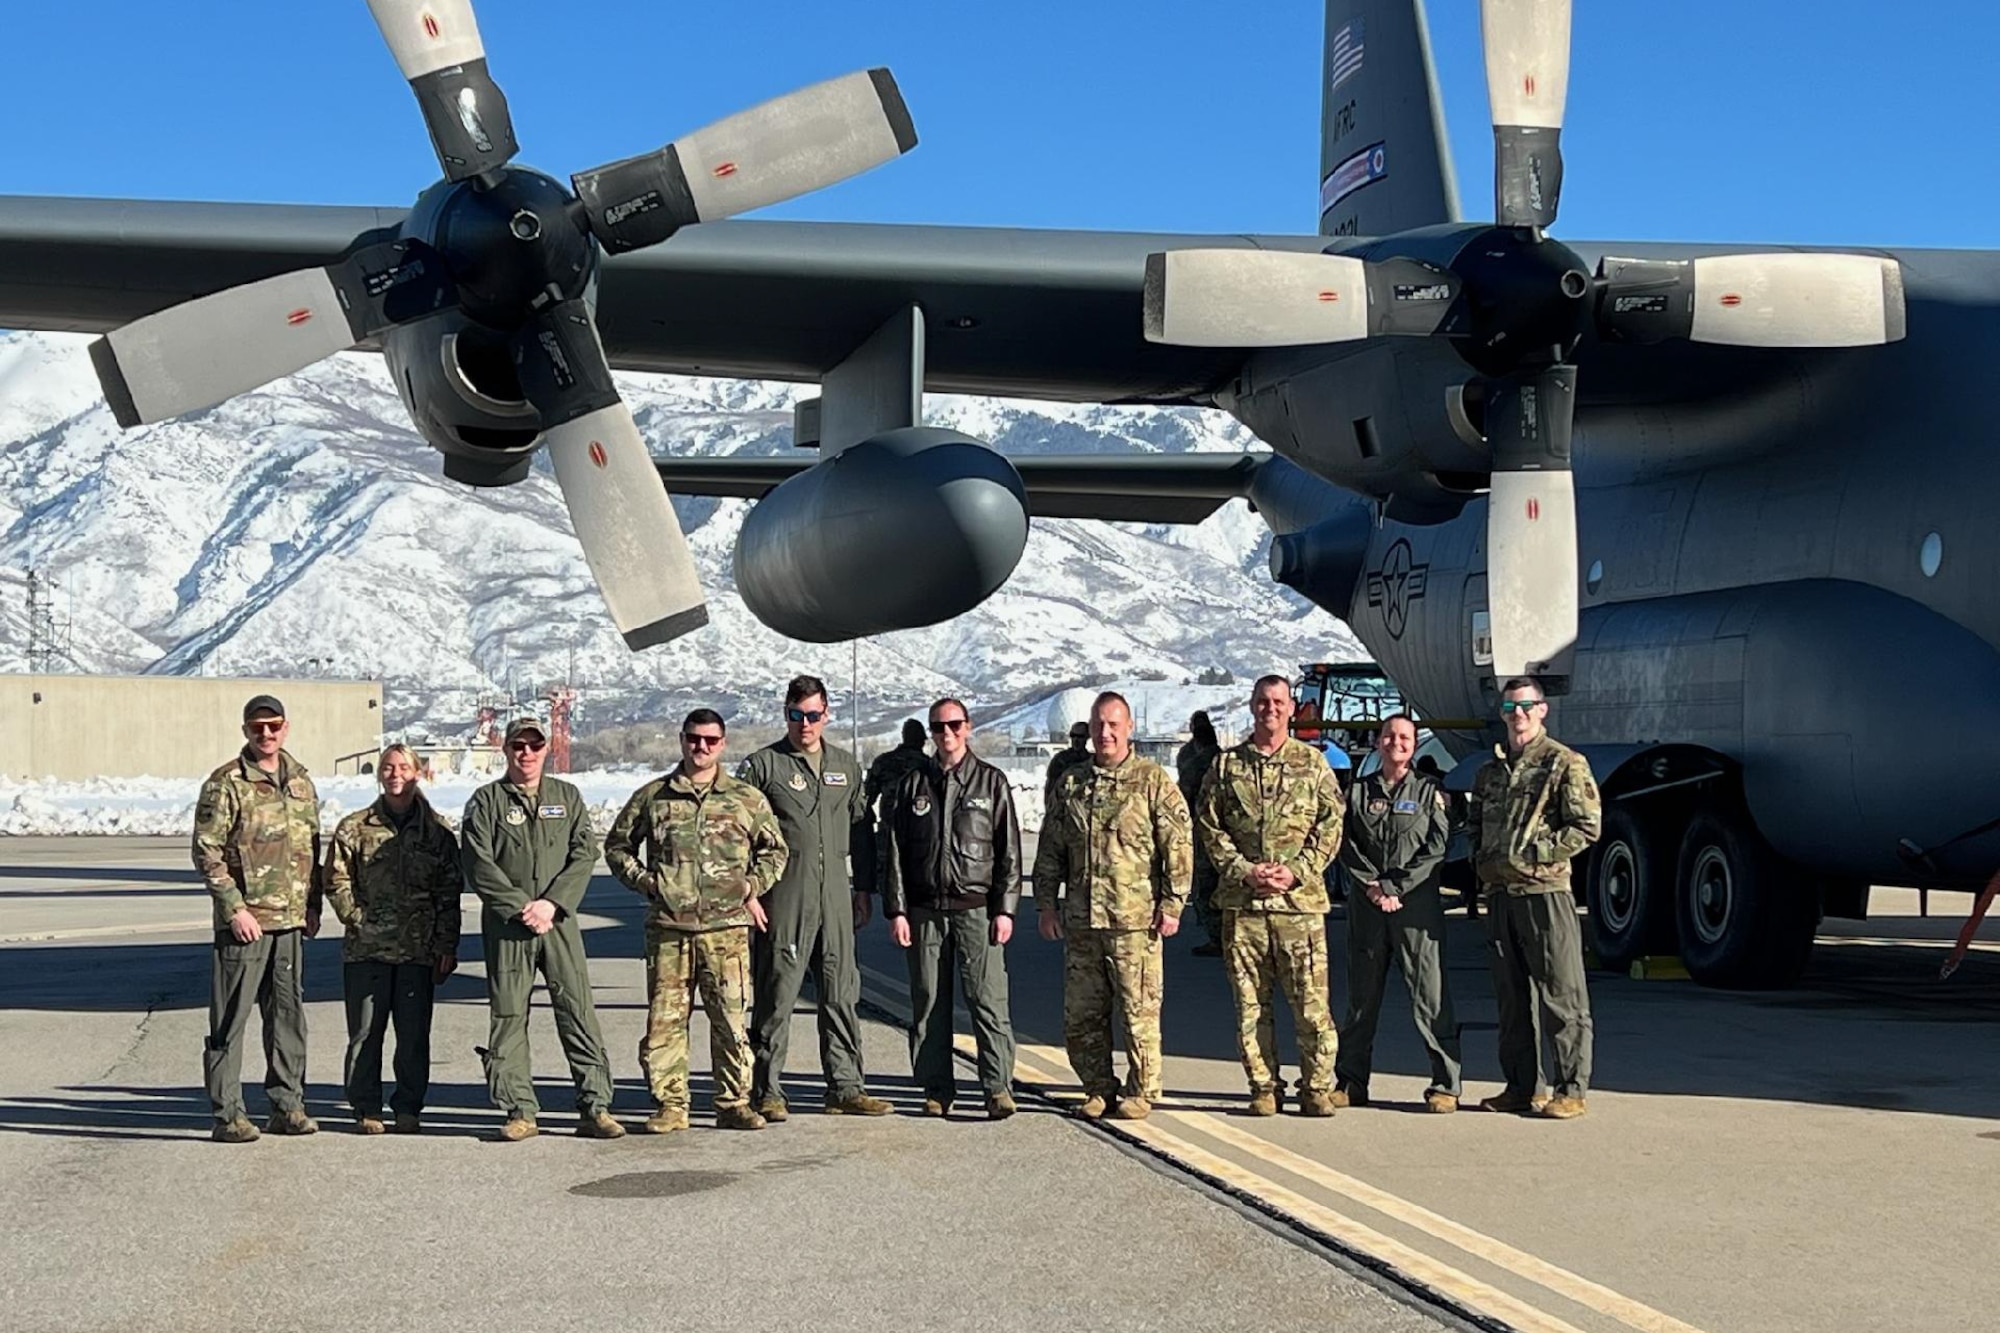 The aircrew members pose in front of an aerial spray-modified C-130H Hercules aircraft assigned to the 910th Airlift Wing, Youngstown Air Reserve Station, Ohio, after the new electronic modular aerial spray system’s first product spray, on March 9, 2023, over the Utah Test and Training Range near Hill Air Force Base.